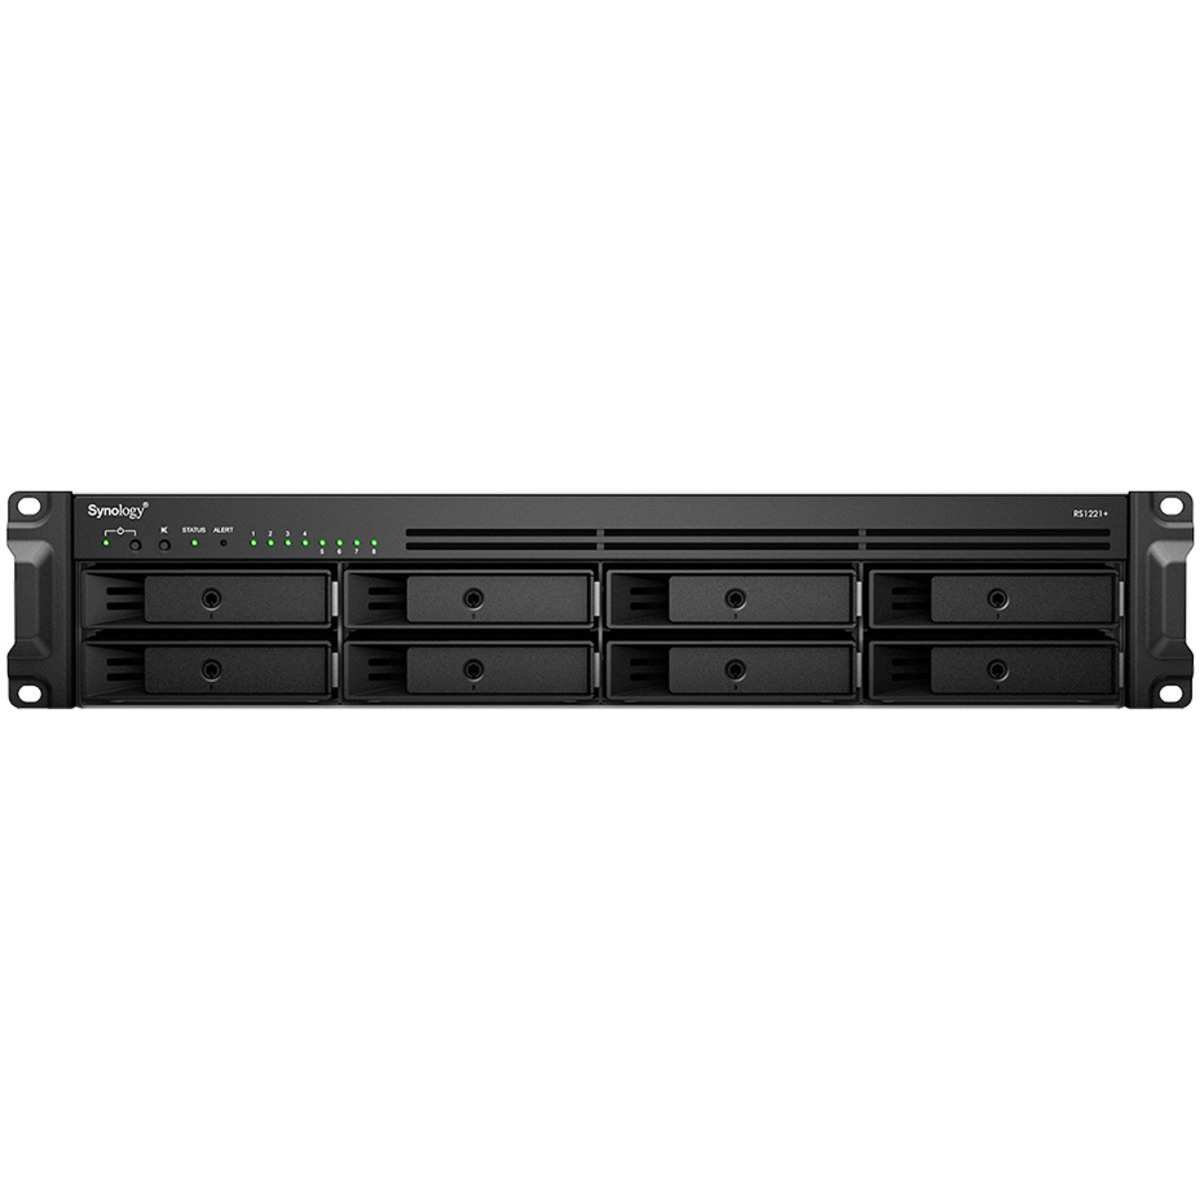 buy $2372 Synology RackStation RS1221+ 8tb RackMount NAS - Network Attached Storage Device 8x1000gb Samsung 870 QVO MZ-77Q1T0 2.5 SATA 6Gb/s SSD CONSUMER Class Drives Installed - Burn-In Tested - nas headquarters buy network attached storage server device das new raid-5 free shipping usa RackStation RS1221+